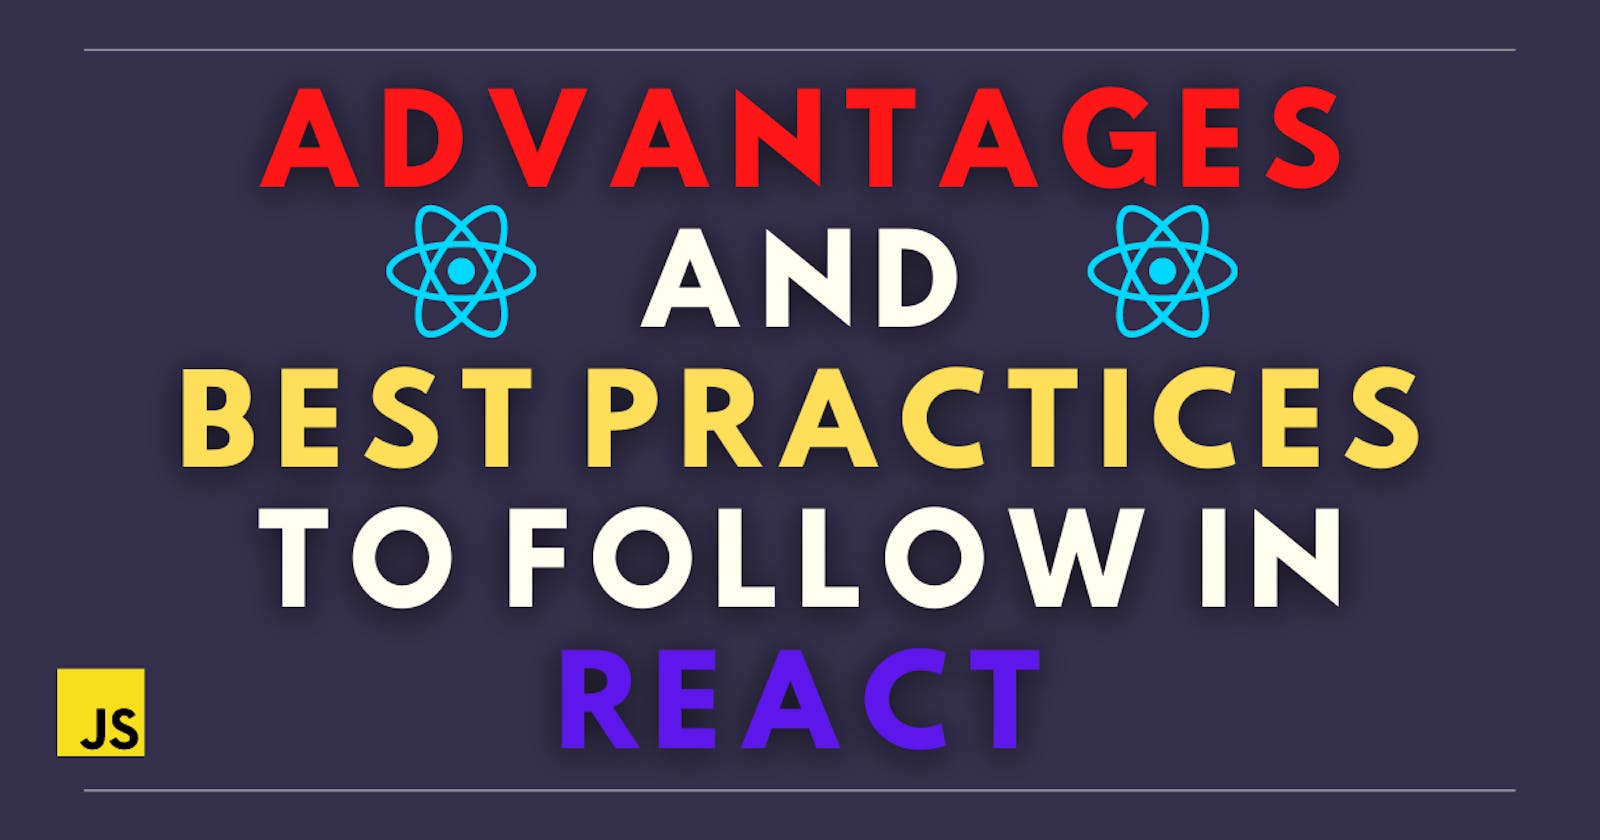 Best practices and advantages of using React